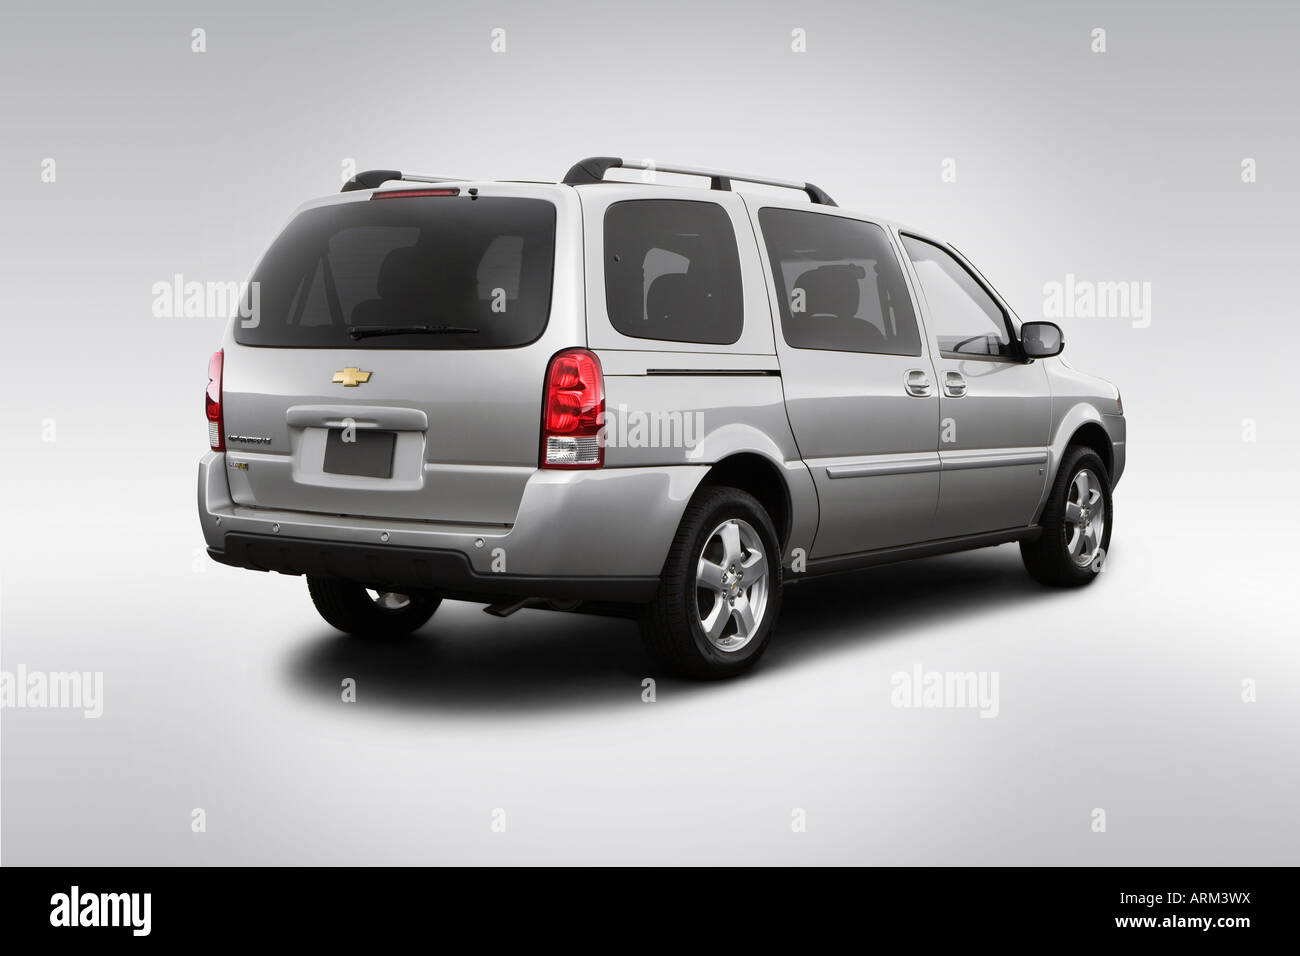 2008 Chevrolet Uplander LT in Silver - Rear angle view Stock Photo